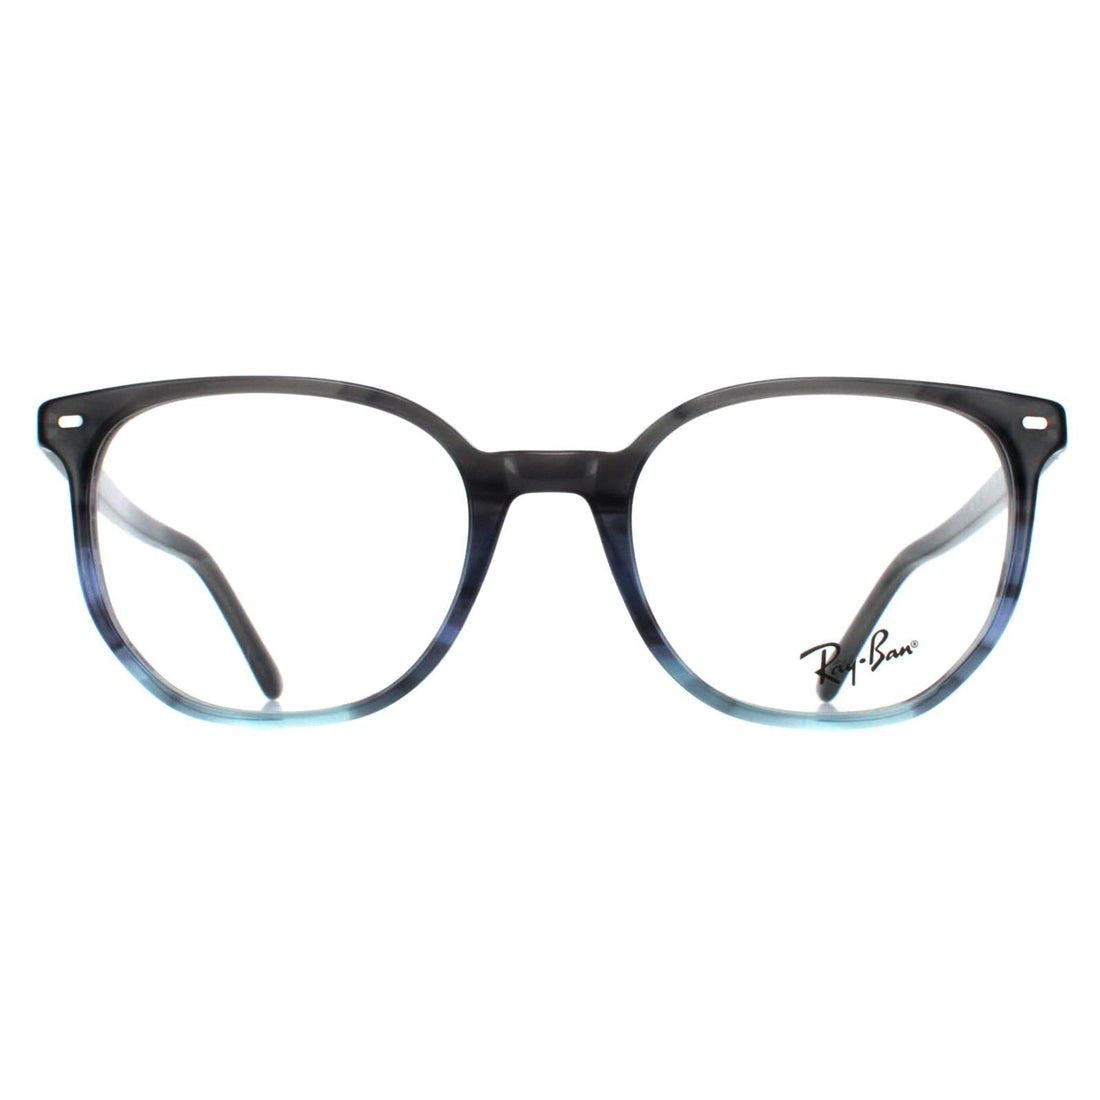 Ray-Ban RX5397 Elliot Glasses Frames Striped Grey and Blue